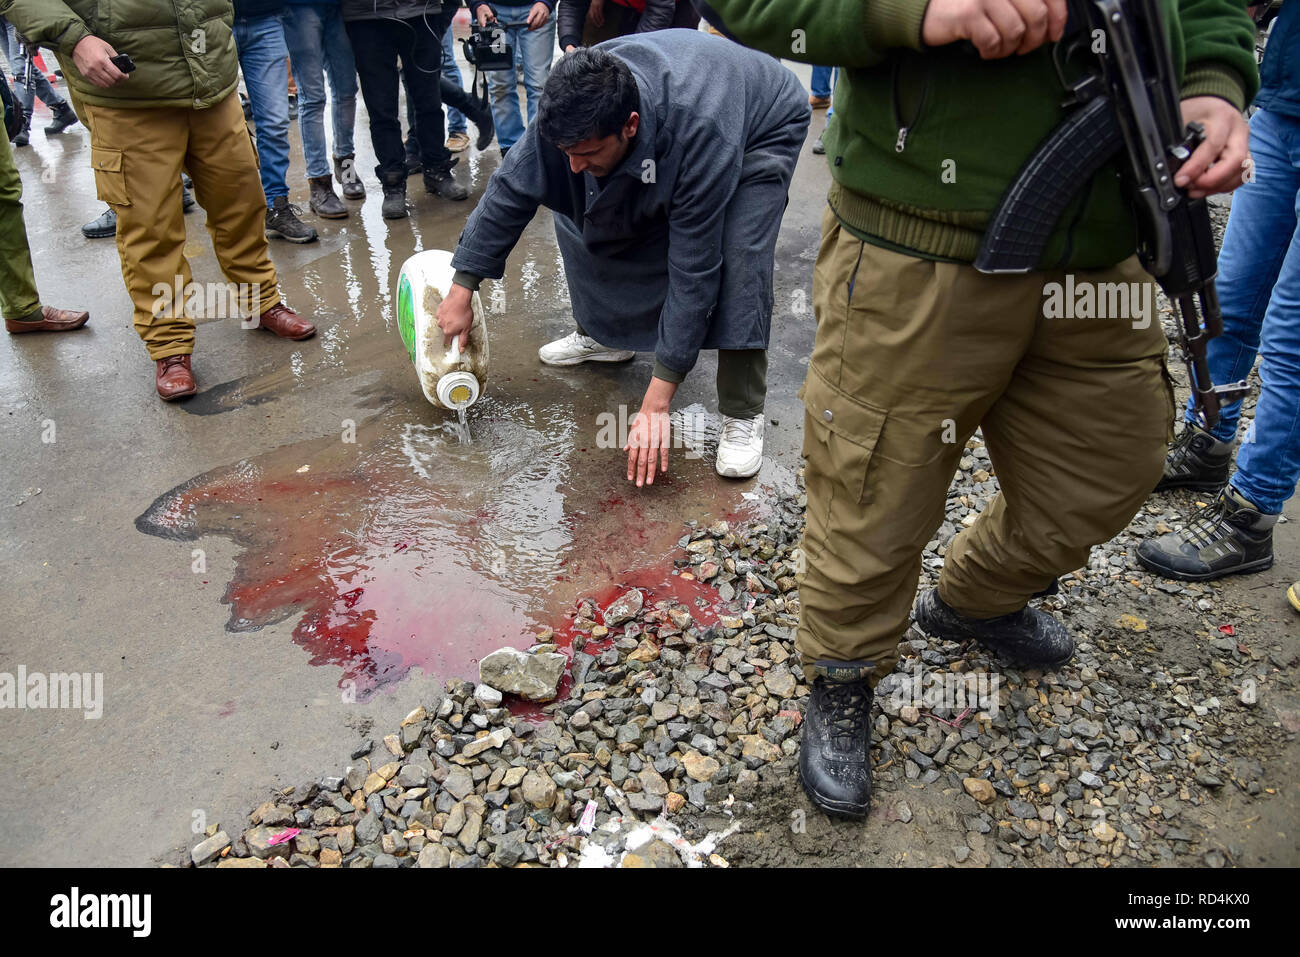 january-17-2019-srinagar-jammu-kashmir-india-a-kashmiri-man-seen-cleaning-the-blood-near-the-site-of-explosion-in-srinagaraccording-to-police-at-least-five-members-of-government-forces-were-injured-on-thursday-in-a-grenade-explosion-blamed-on-rebels-fighting-against-indian-rule-in-indian-controlled-kashmirs-main-city-credit-idrees-abbassopa-imageszuma-wirealamy-live-news-RD4KX0.jpg